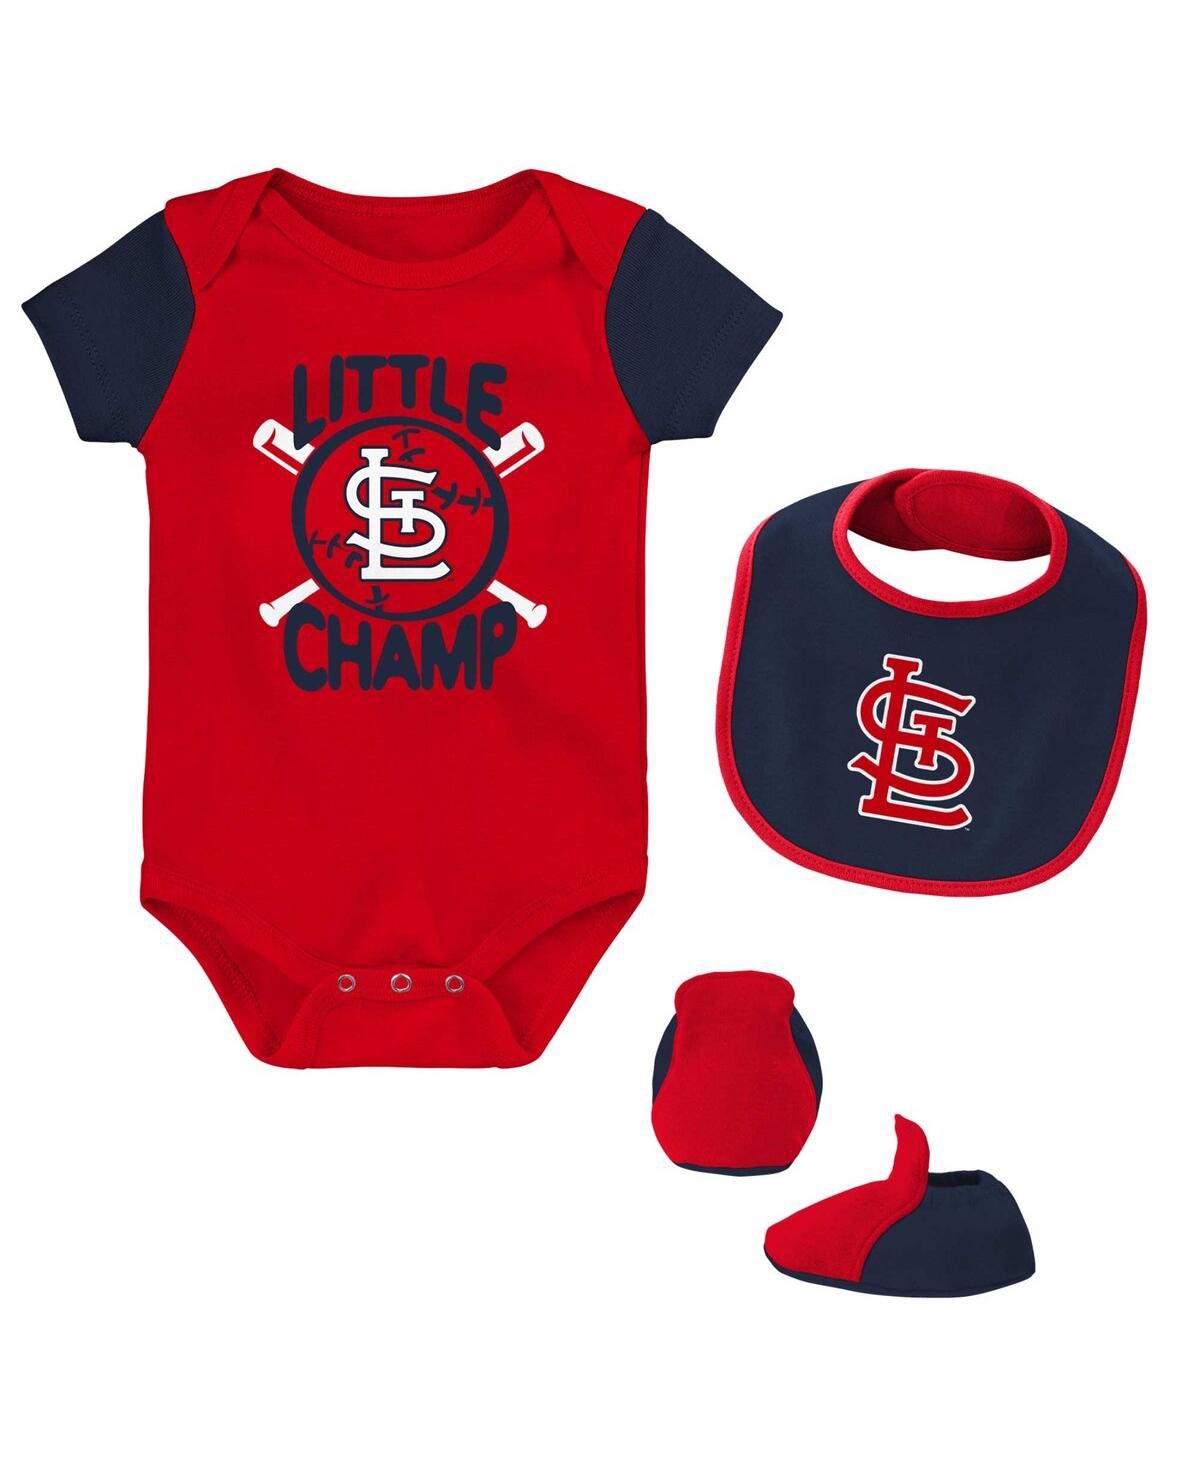 Shop Outerstuff Newborn And Infant Boys And Girls Red, Navy St. Louis Cardinals Little Champ Three-pack Bodysuit Bib In Red,navy